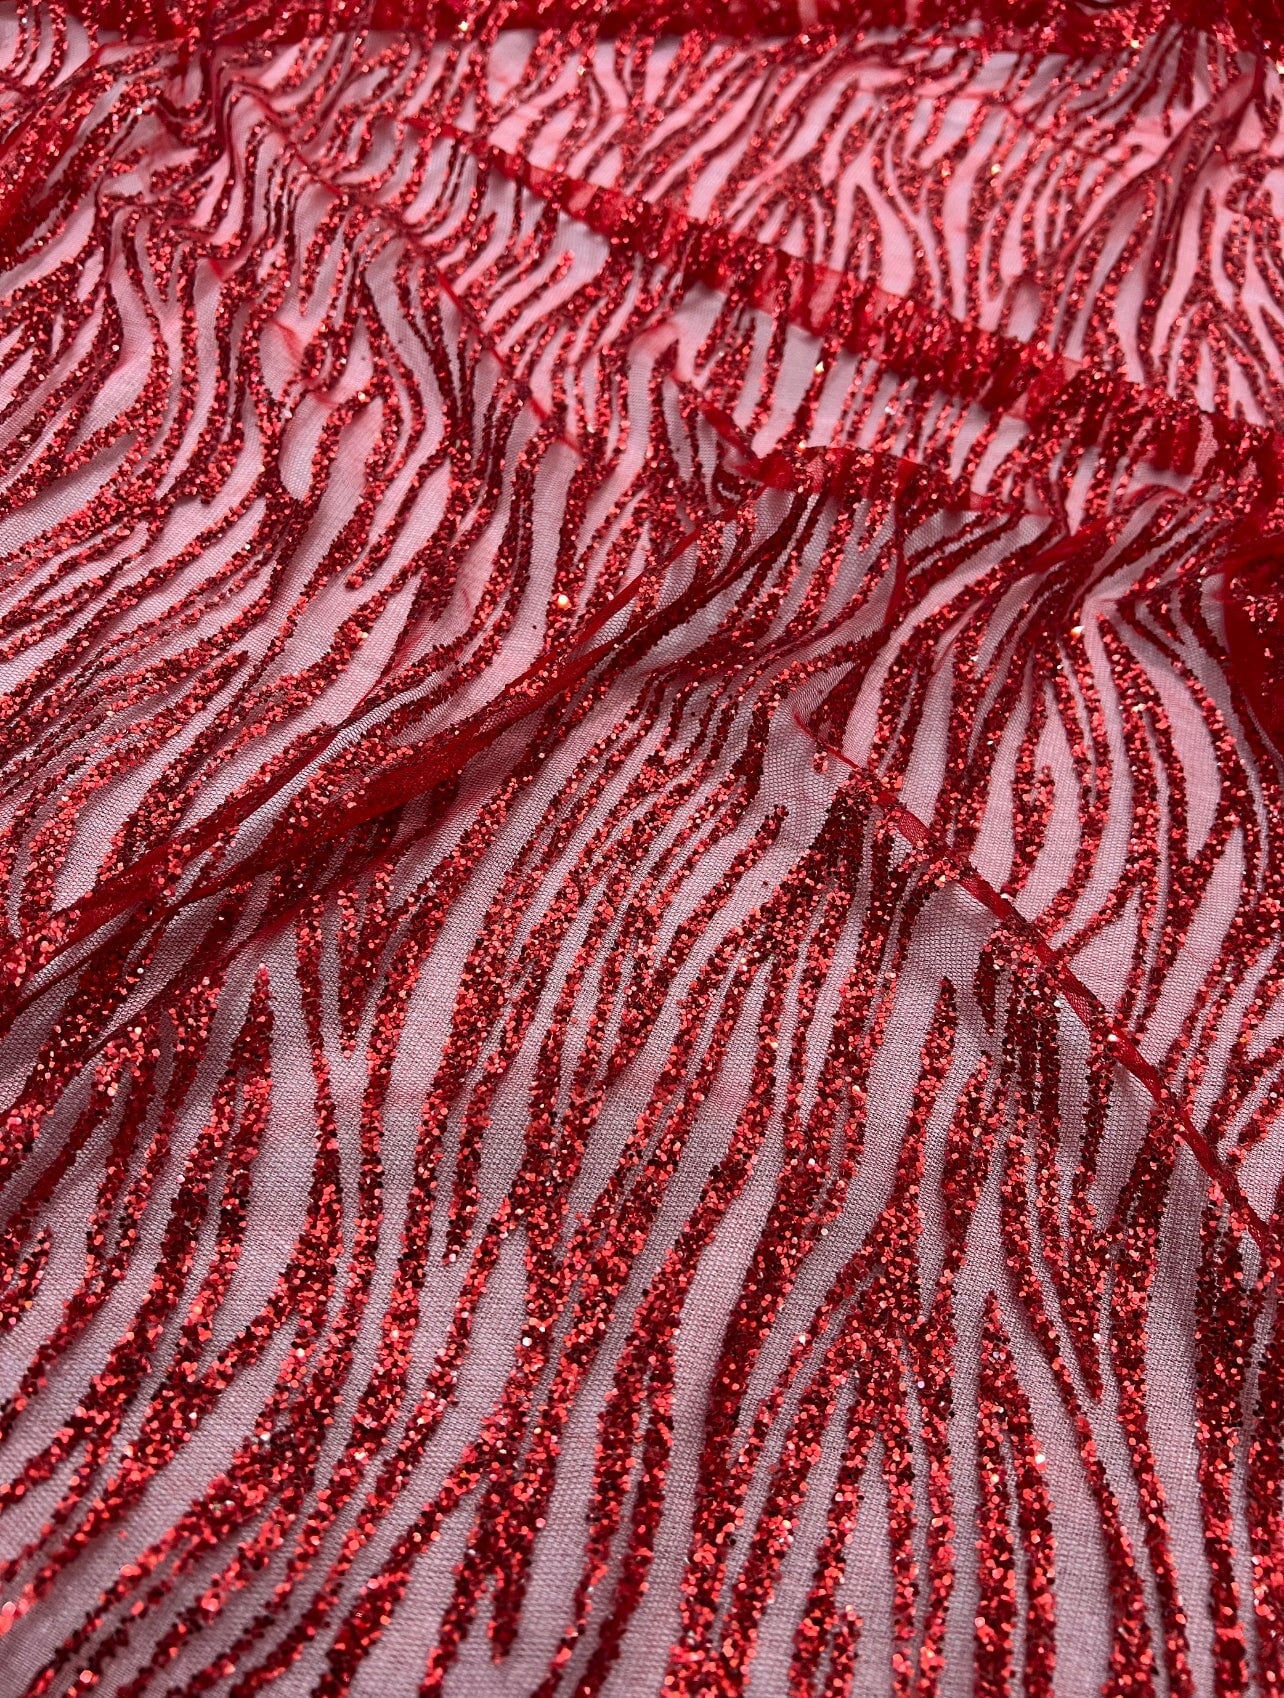 Red Glitter Lace Fabric on Mesh, dark red lace Glitter, light red Lace, blood red lace, lace for woman, lace for bride,  lace on discount, lace on sale, premium lace, kiki textile lace, lace for party wear dresses, lace on mesh